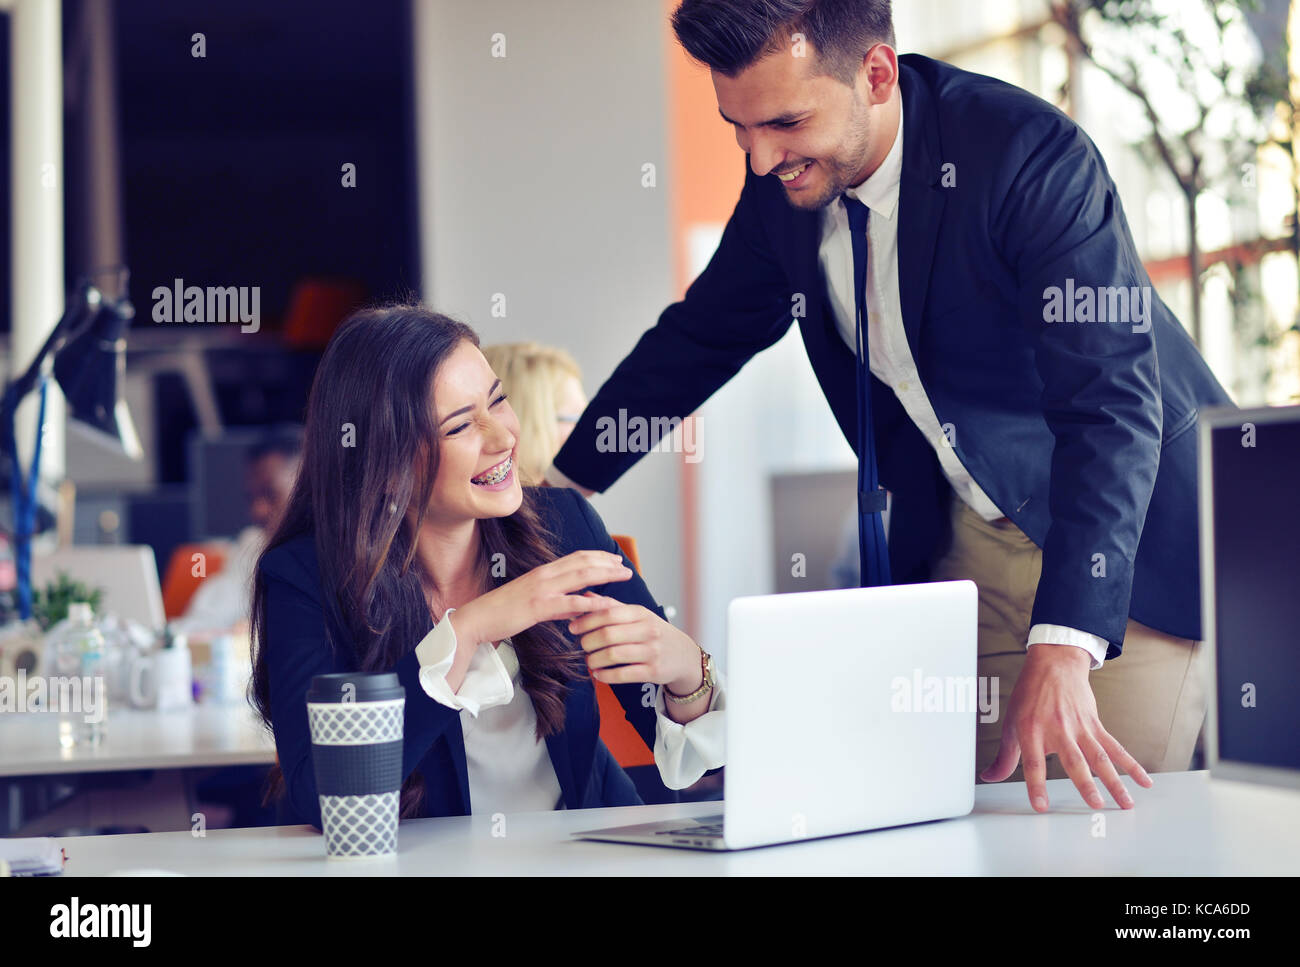 startup business concept with young multiethnic couple in modern office working on laptop Stock Photo